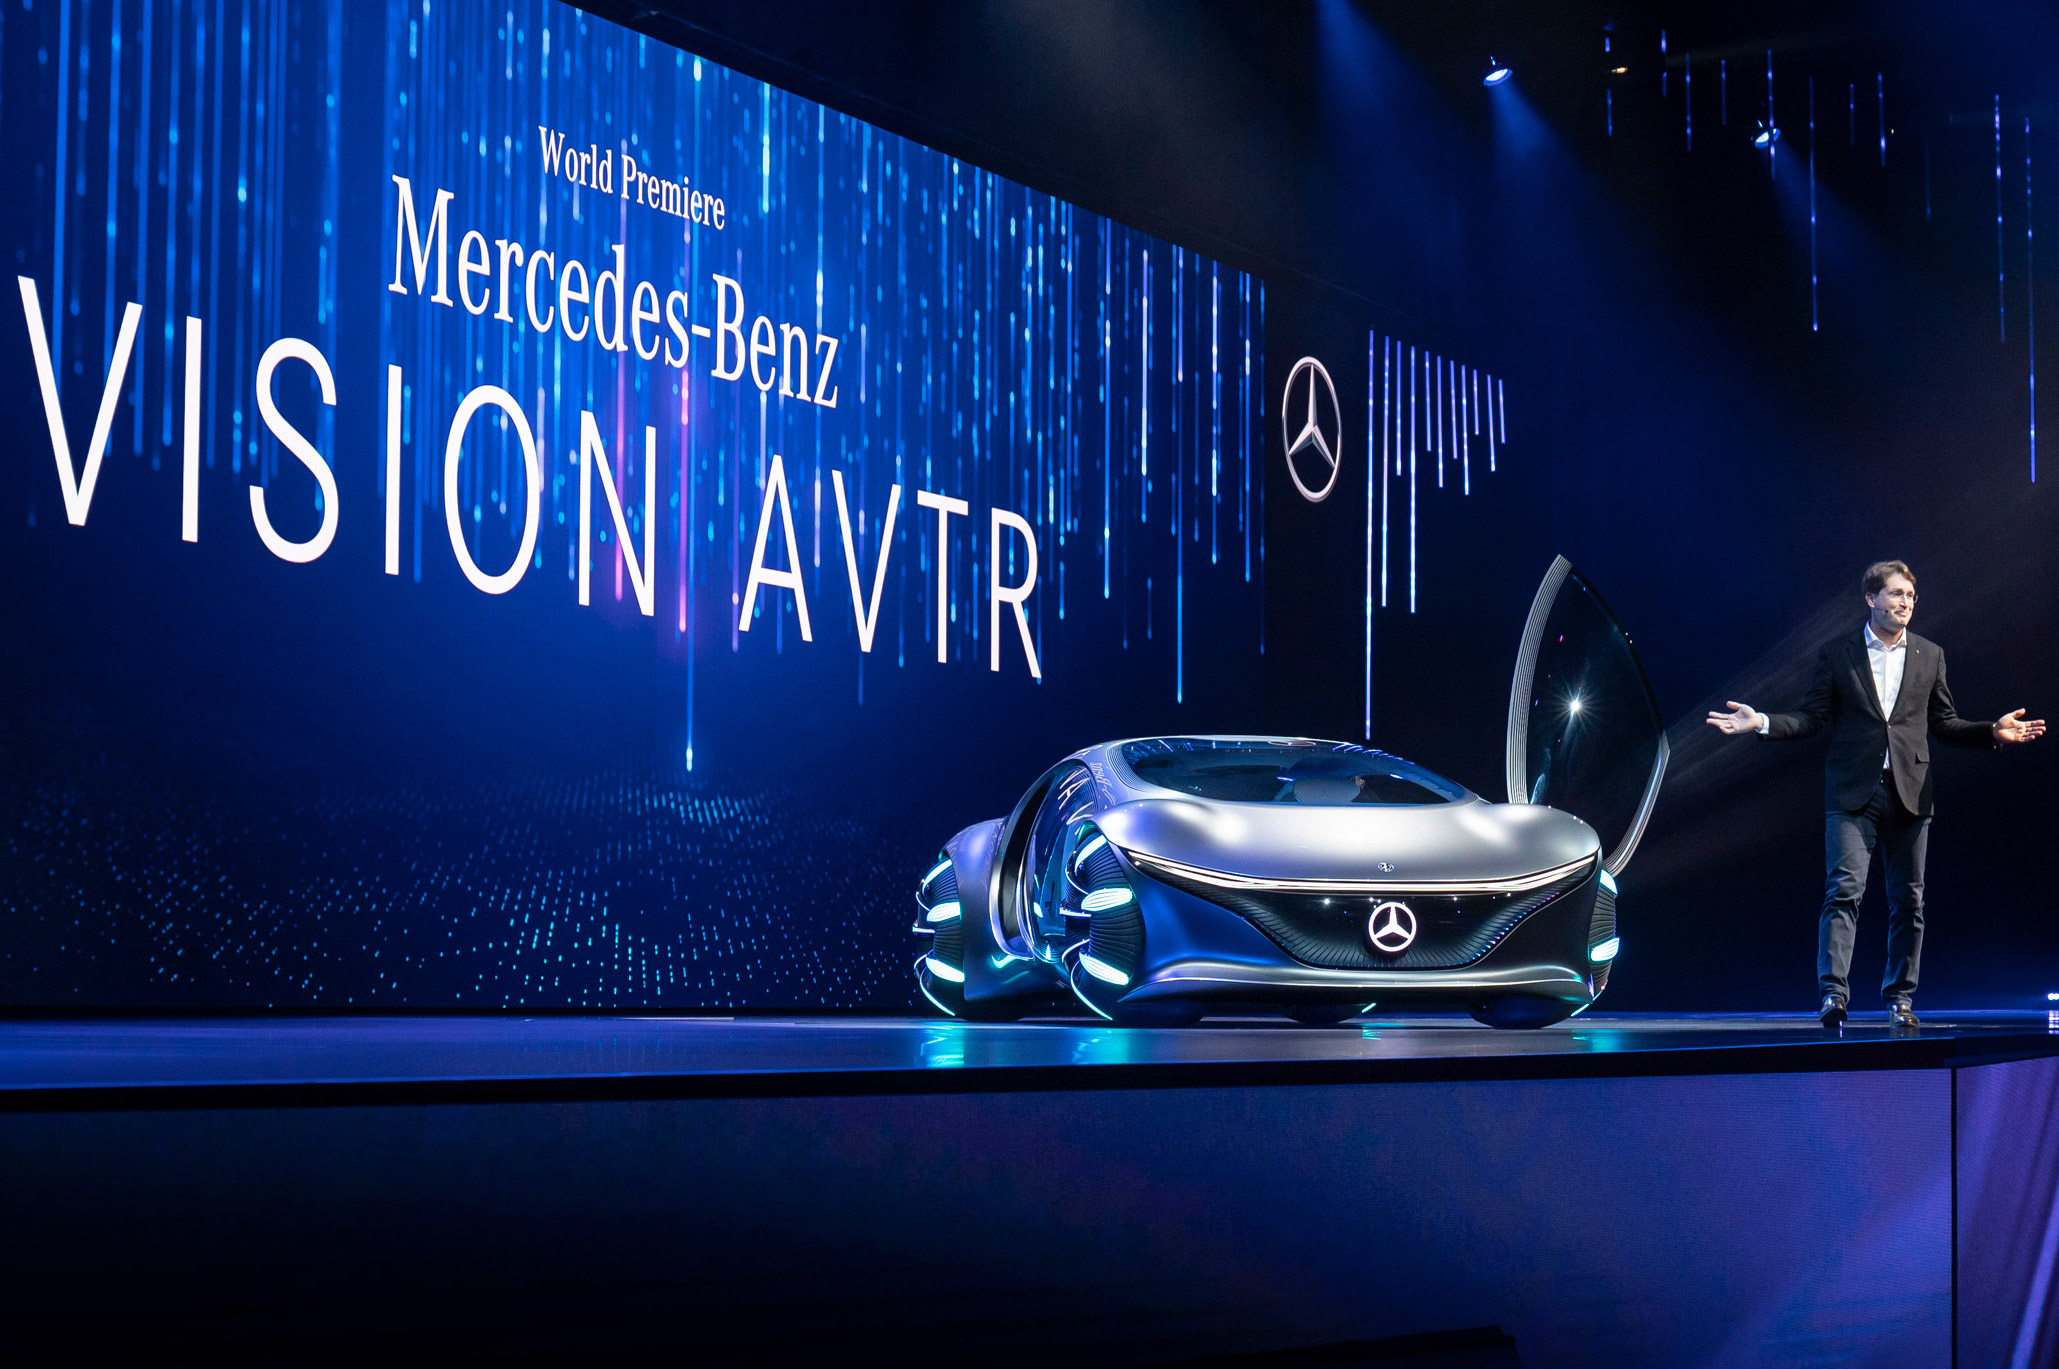 Mercedes unveils a concept car inspired by Avatar movie